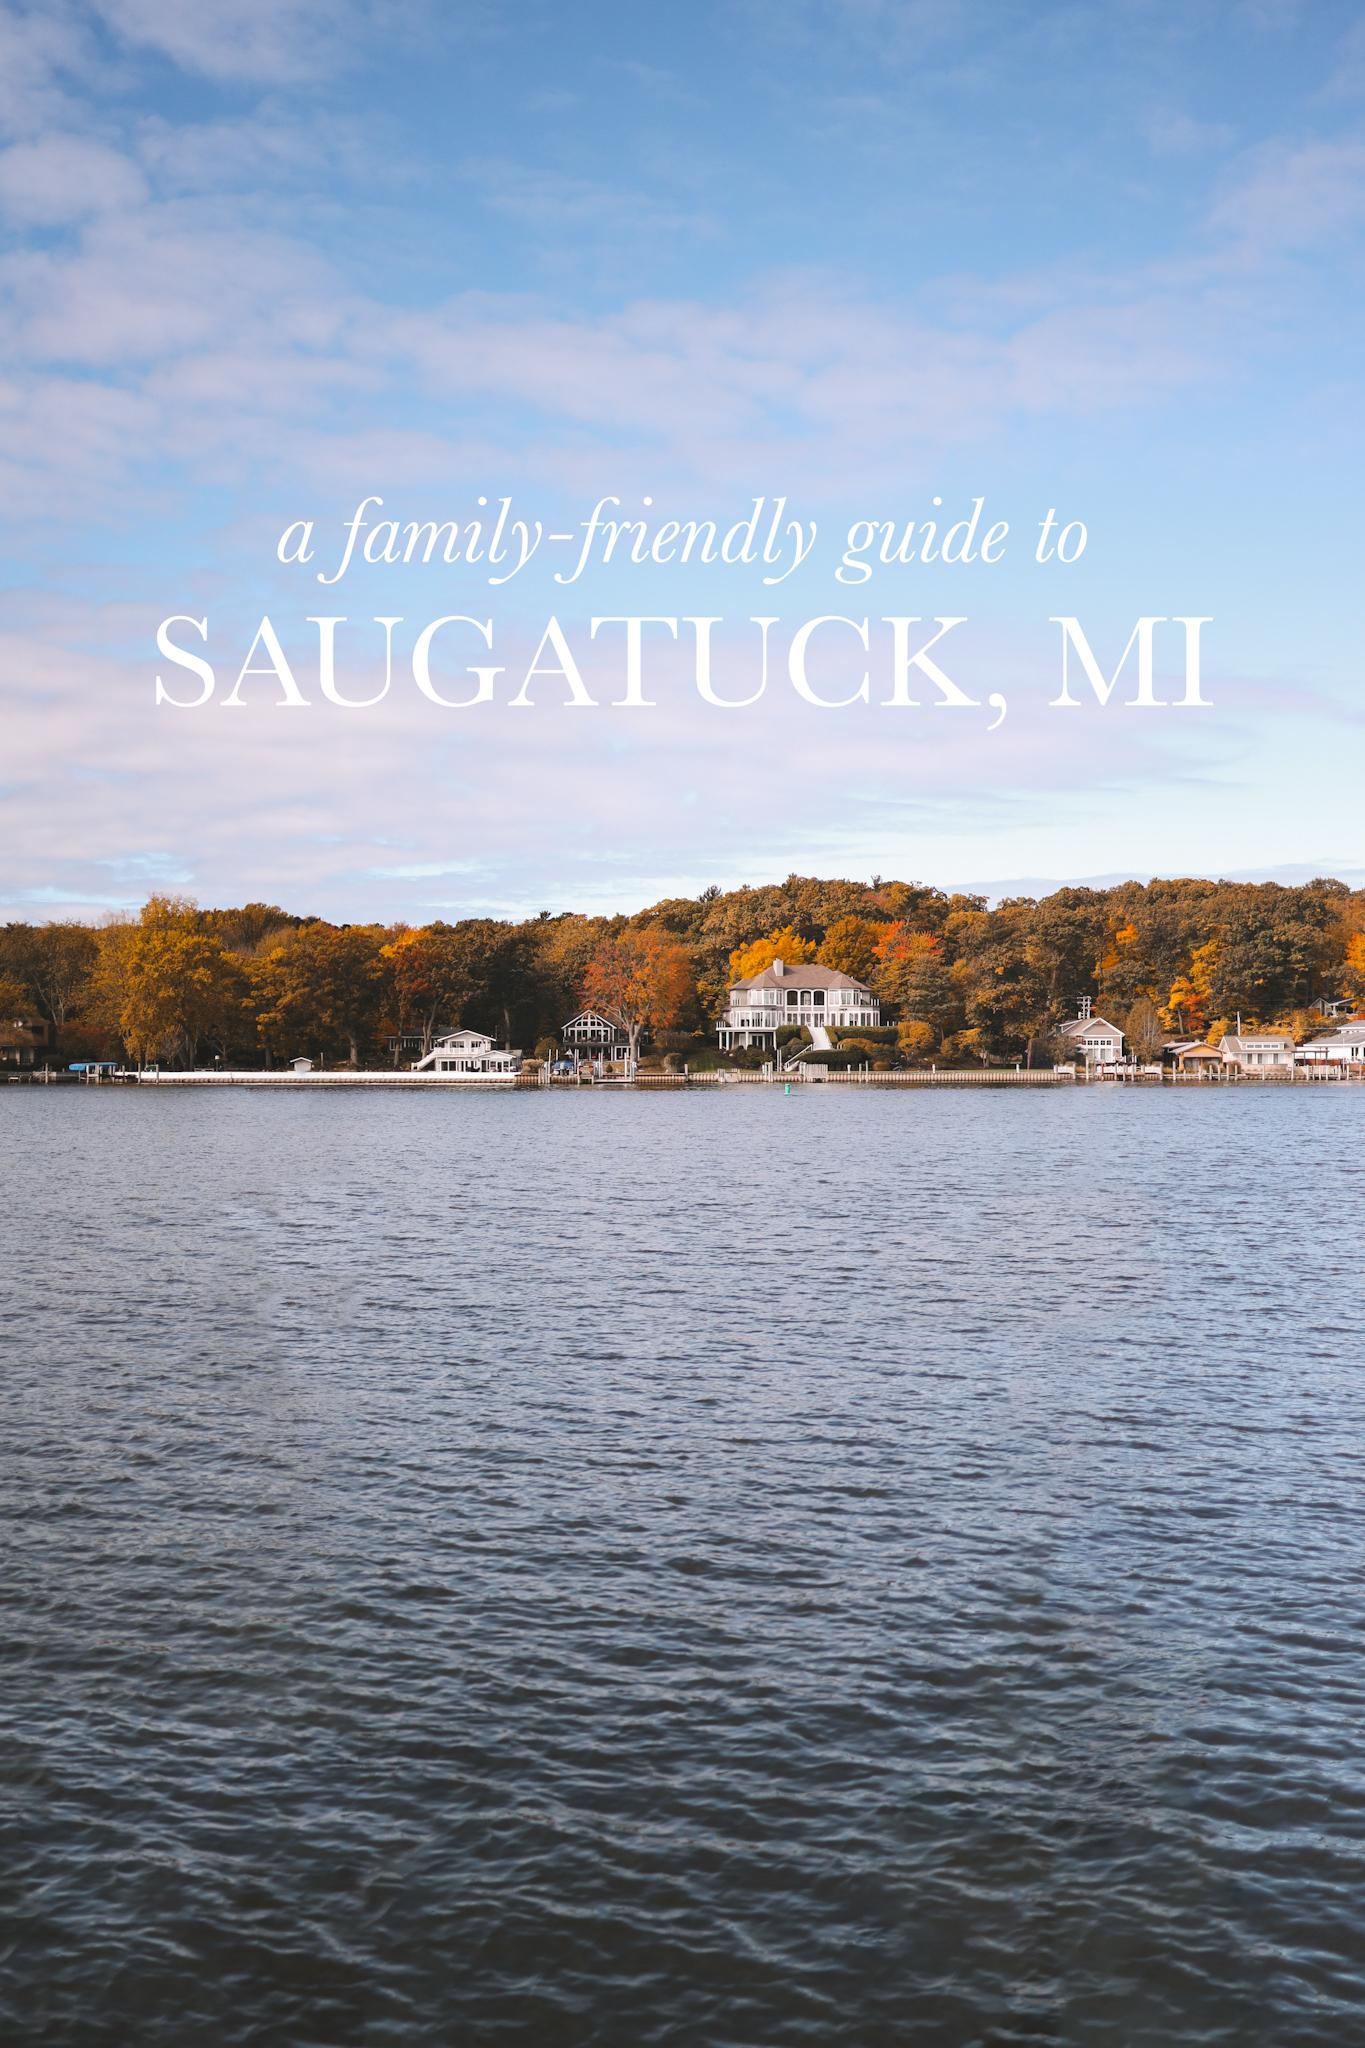 Preppy Gift Ideas, Michigan life and style